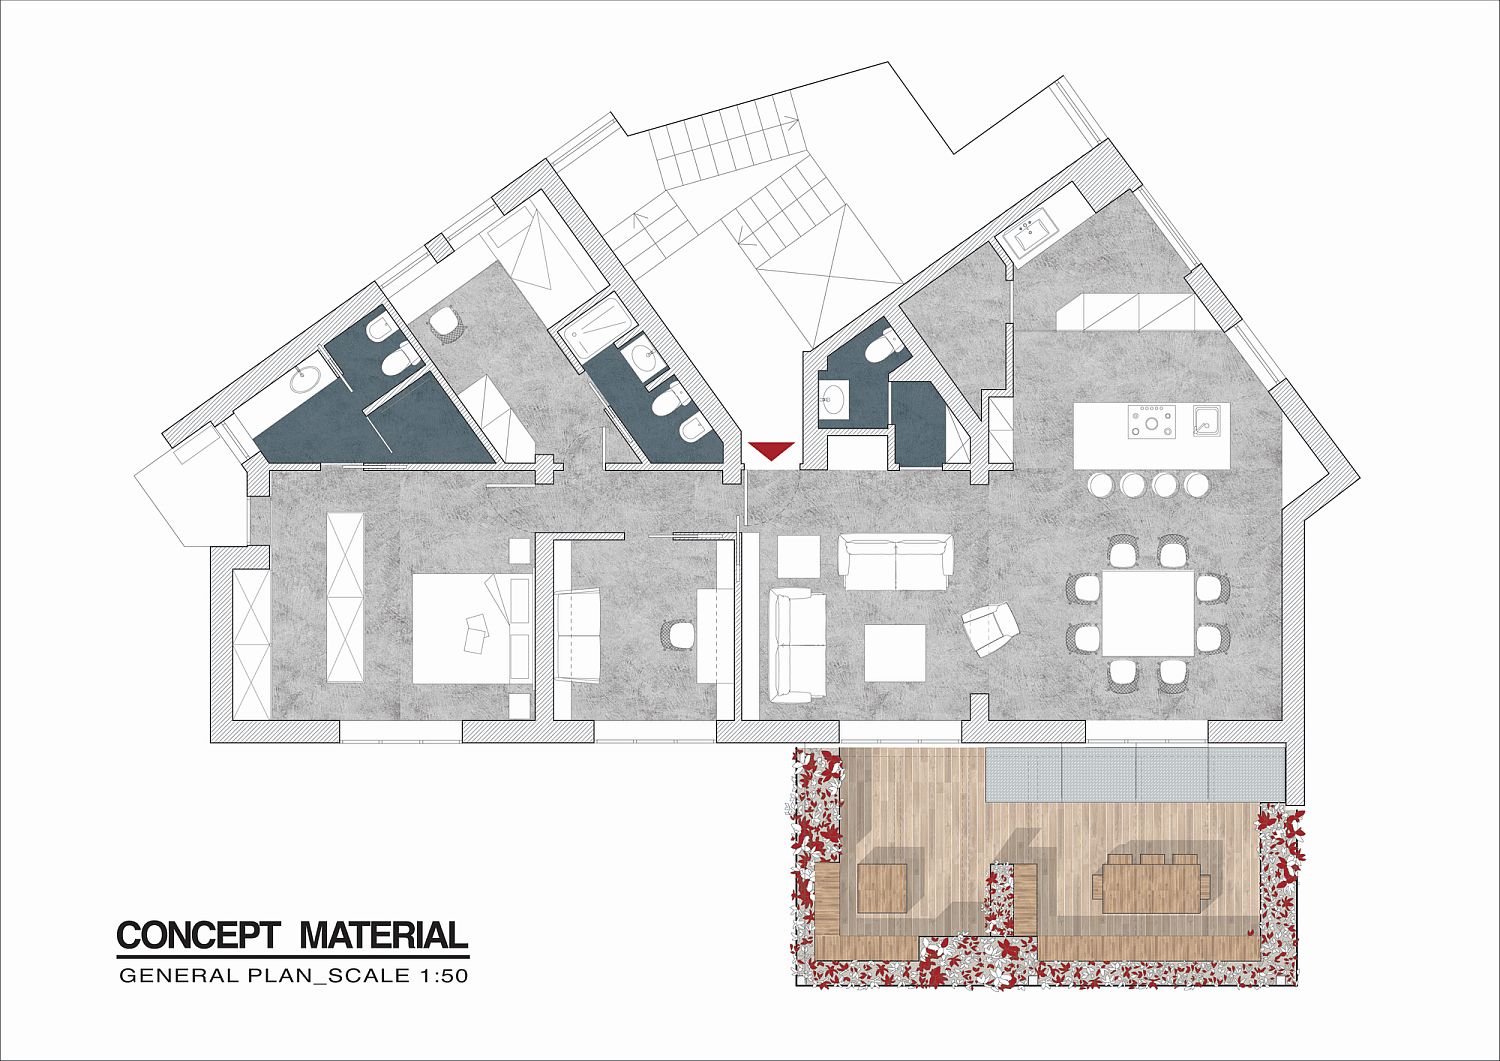 Floor-plan-of-contemporary-Hemingway-Martini-Apartment-in-Italy-with-revamped-interior